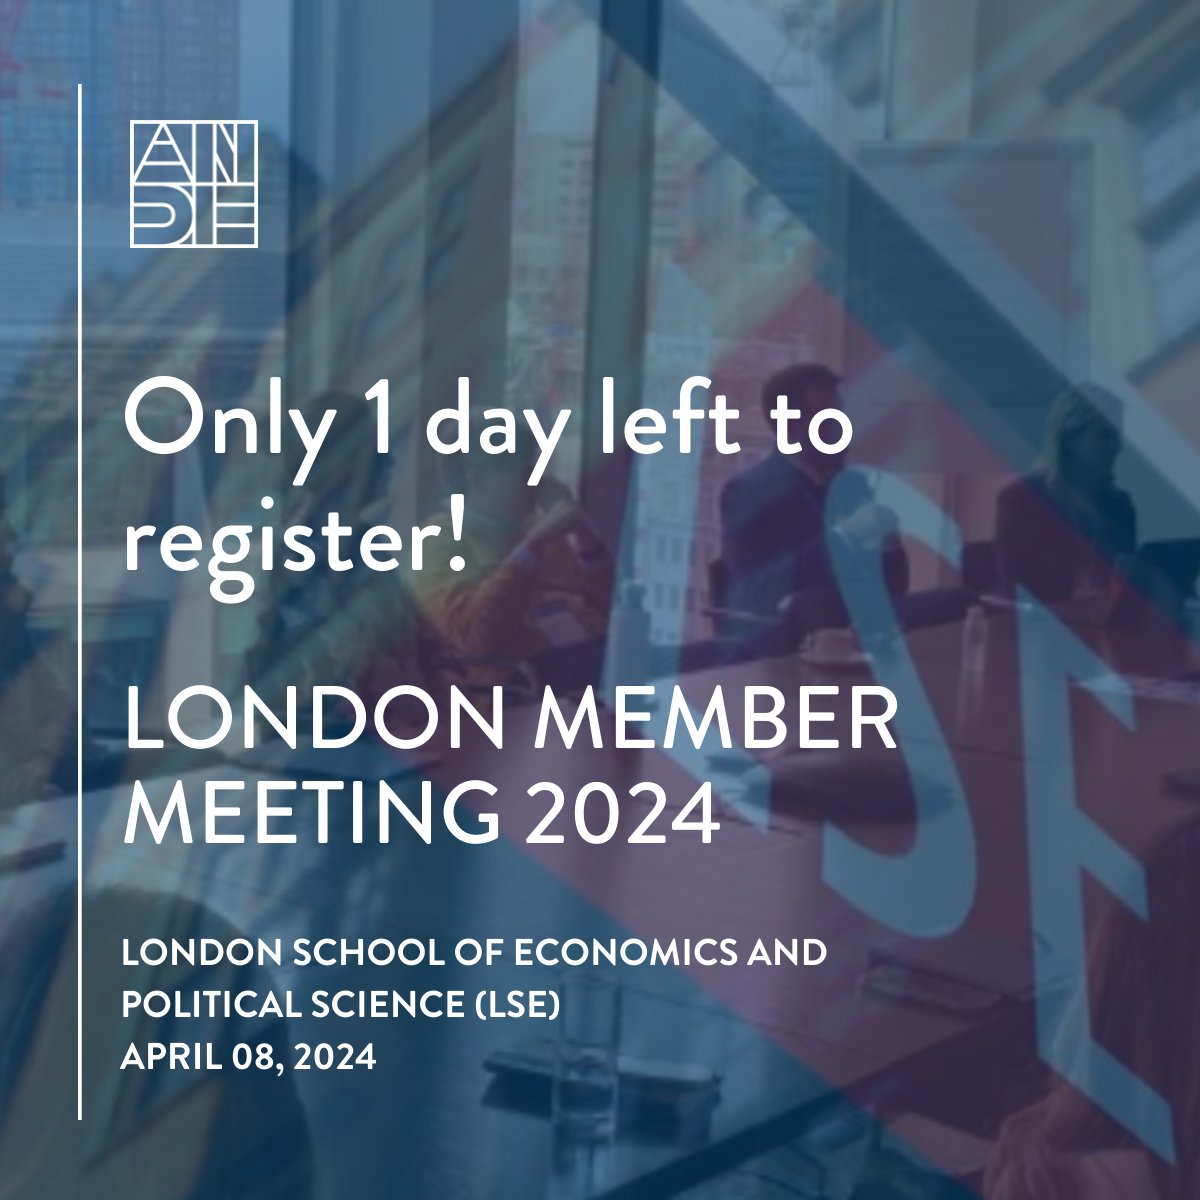 LAST CHANCE! The #LondonMemberMeeting closes registration tomorrow! 🇬🇧Network & collaborate in person at The London School of Economics and Political Science (LSE)'s @The_IGC 🔗 Learn more & register here: andeglobal.org/event/london-m… #skollwf #ANDE15Years #entrepreneurship #SDGs